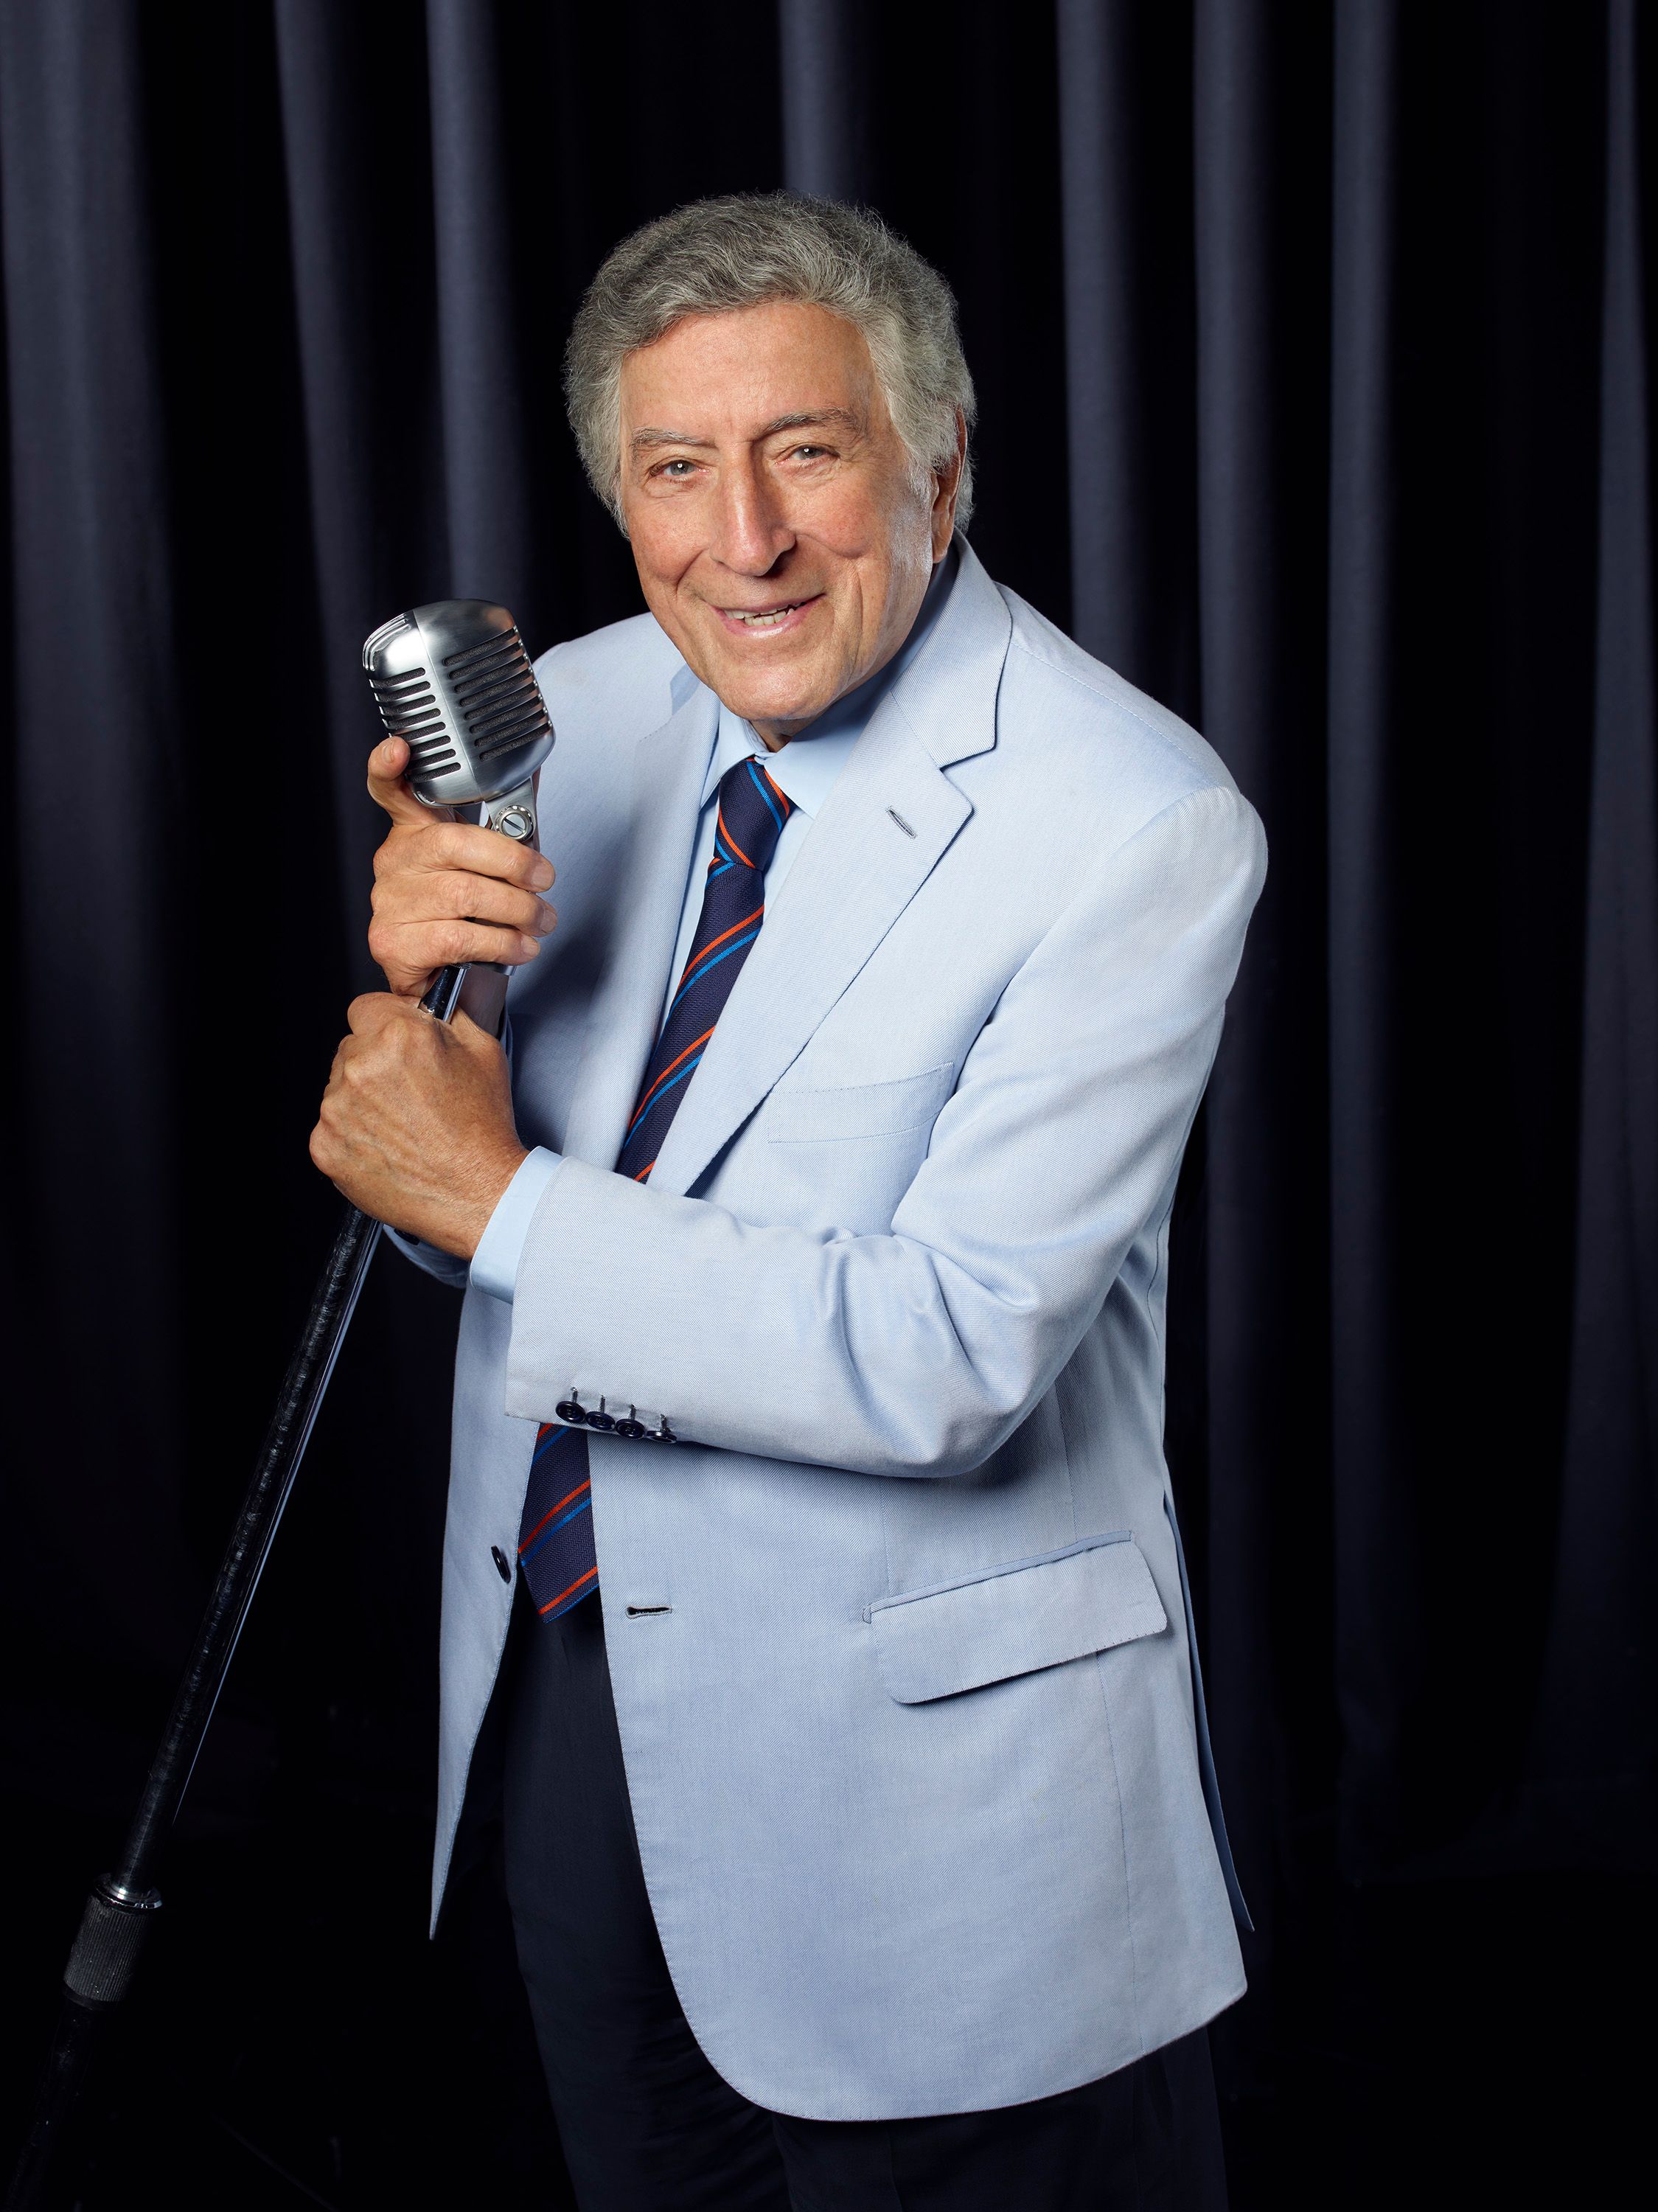 Singer Tony Bennett at NBC Universal in 2016 | Source: Getty Images